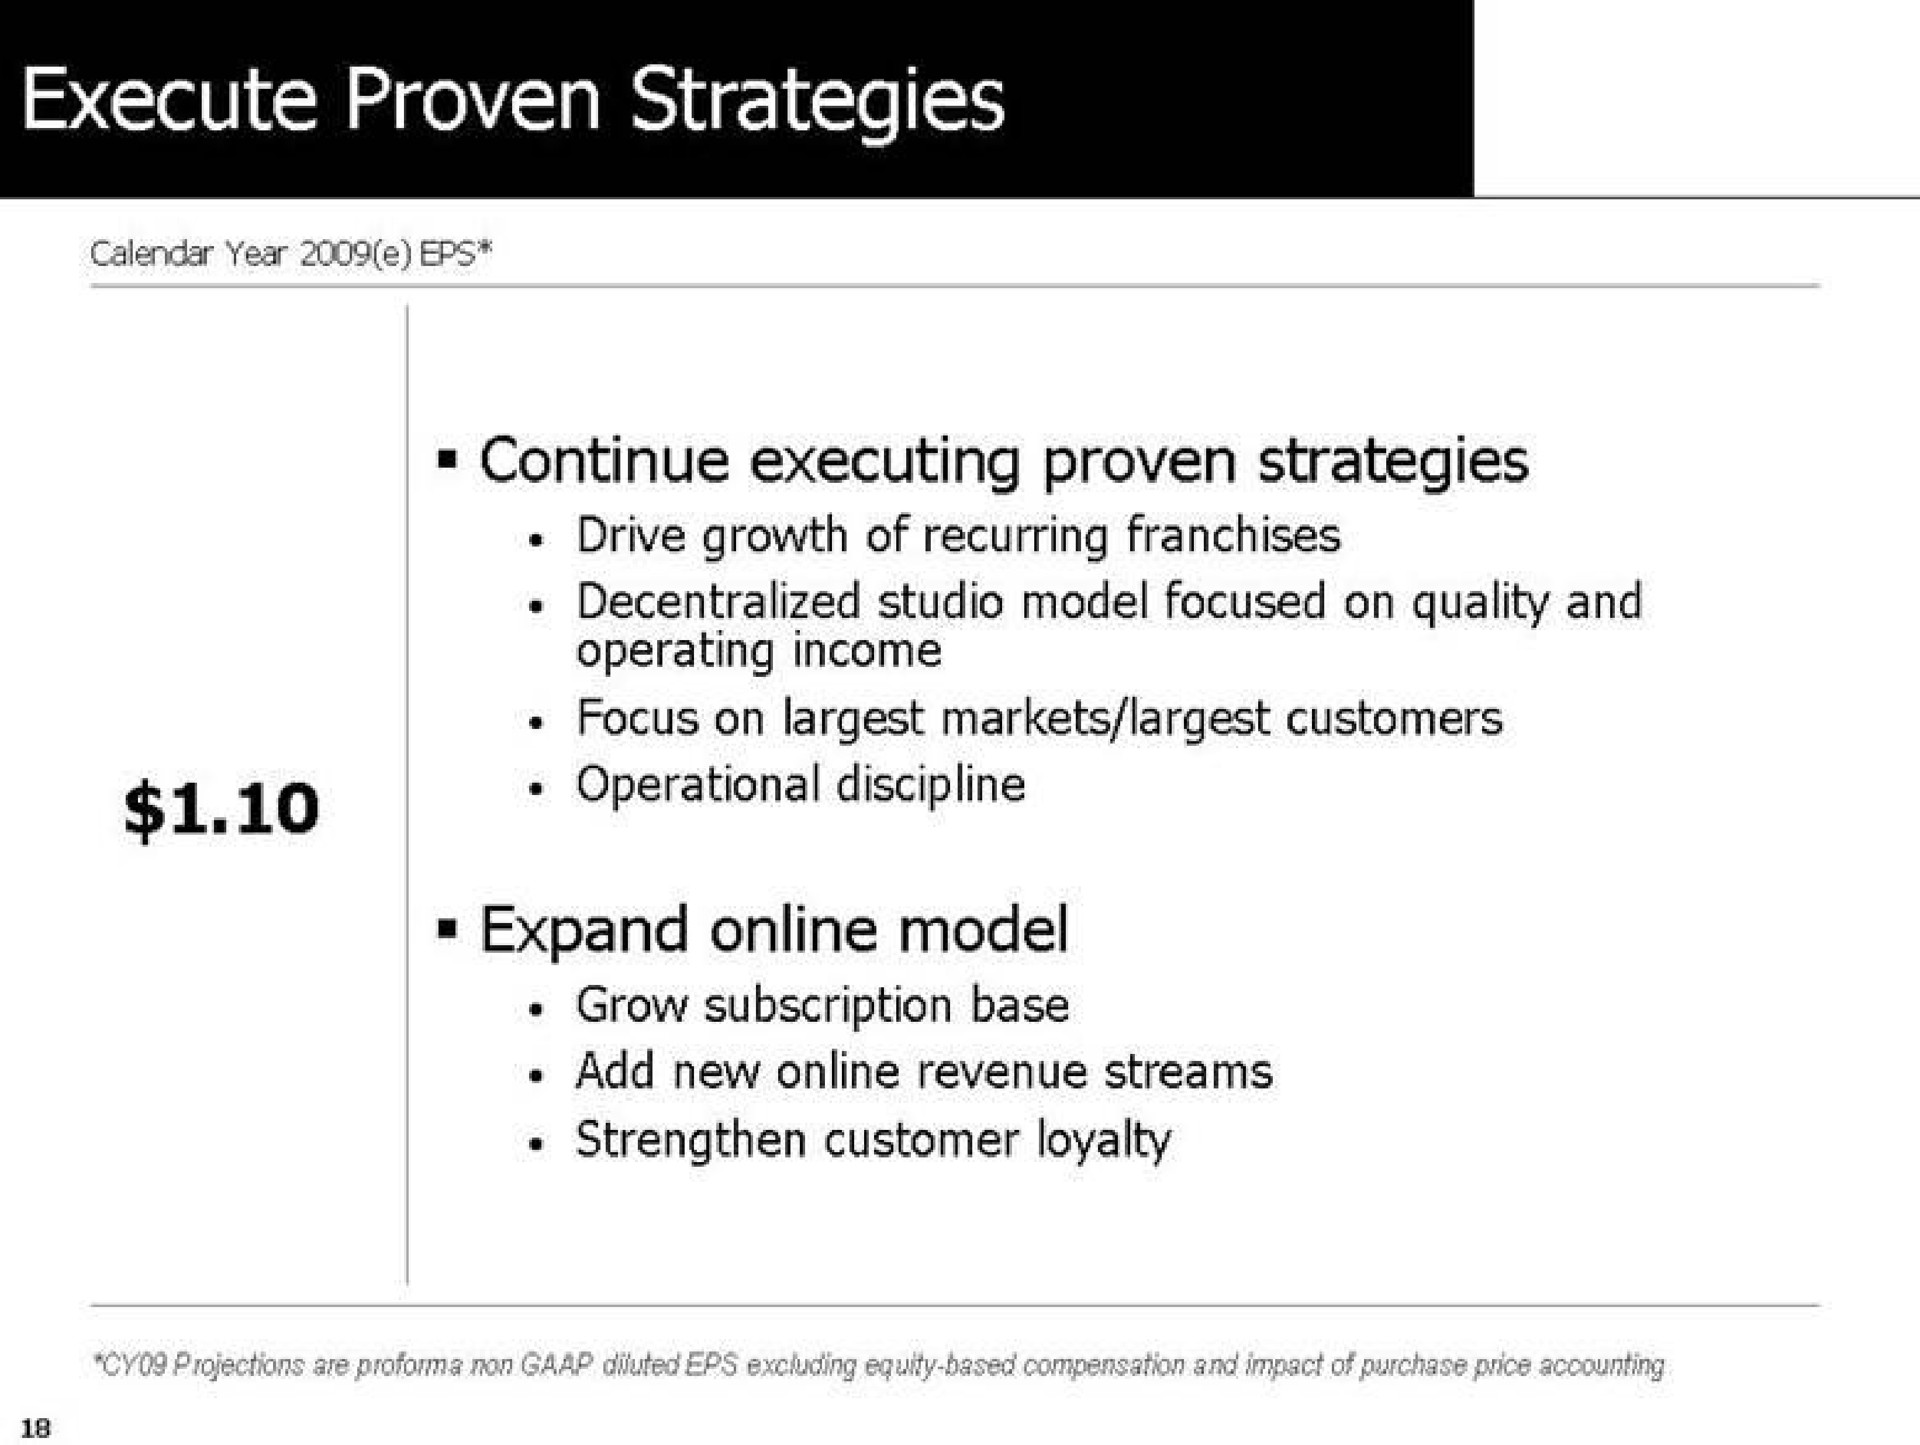 execute proven strategies | Activision Blizzard